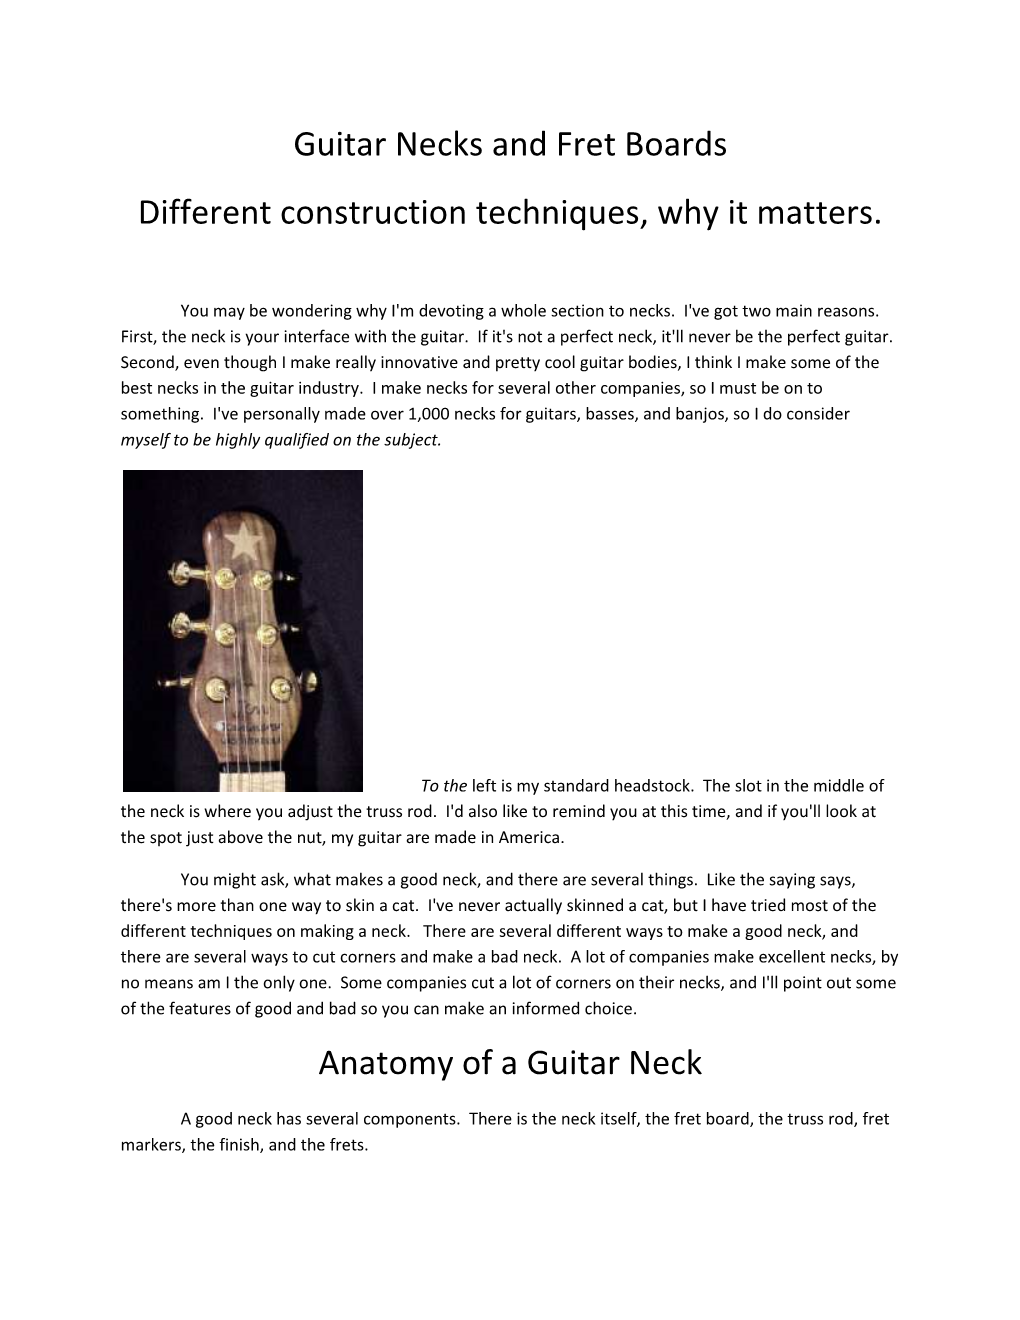 Guitar Necks and Fret Boards Different Construction Techniques, Why It Matters